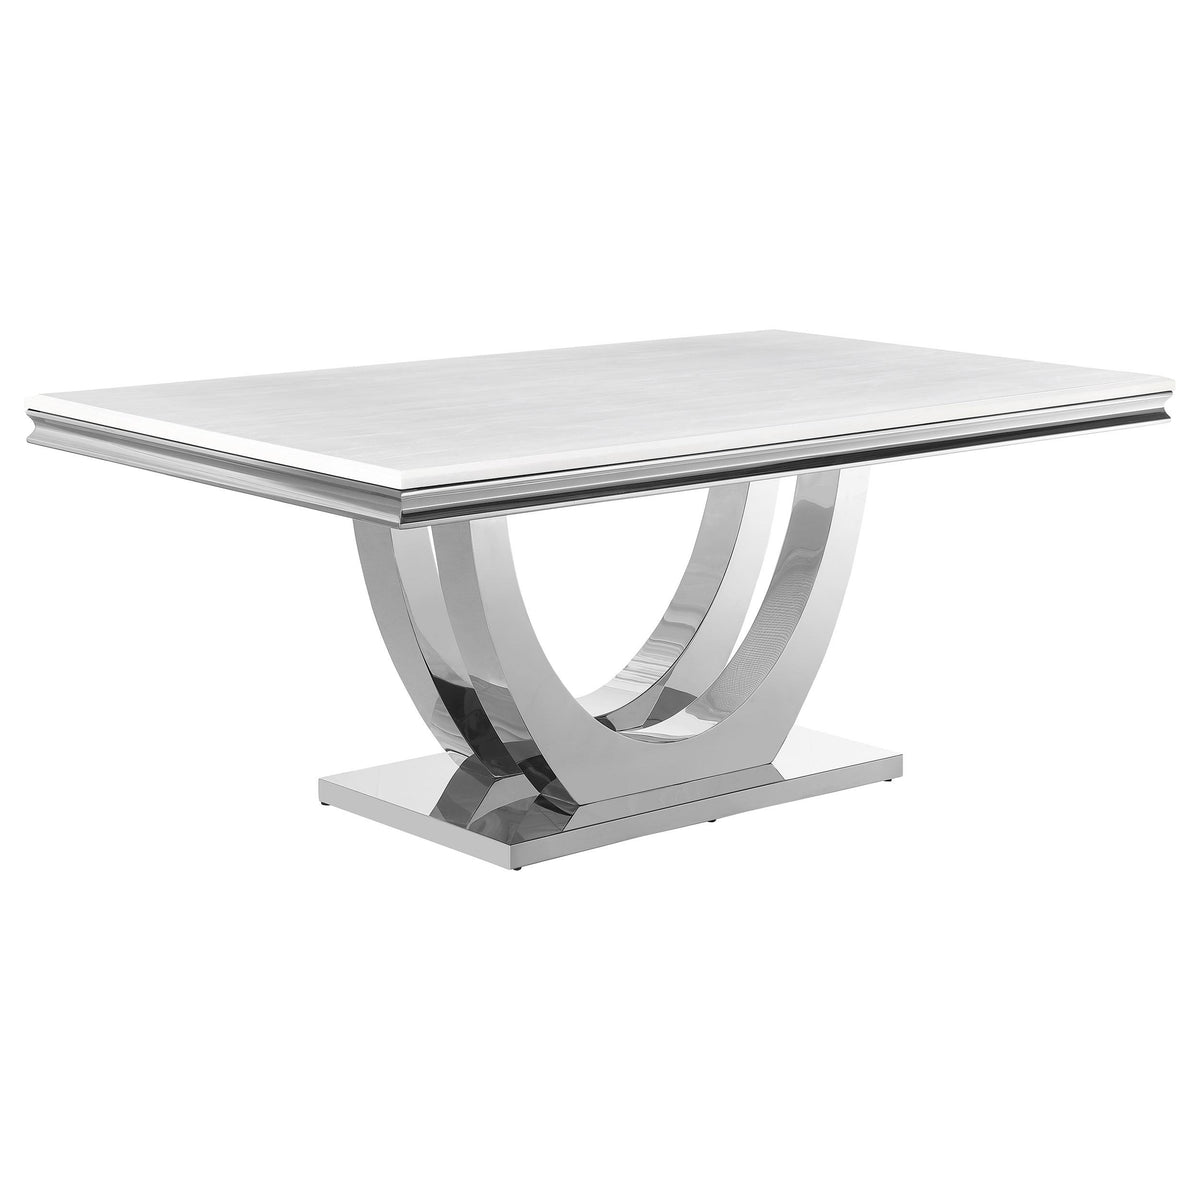 Kerwin Rectangle Faux Marble Top Dining Table White and Chrome  Las Vegas Furniture Stores